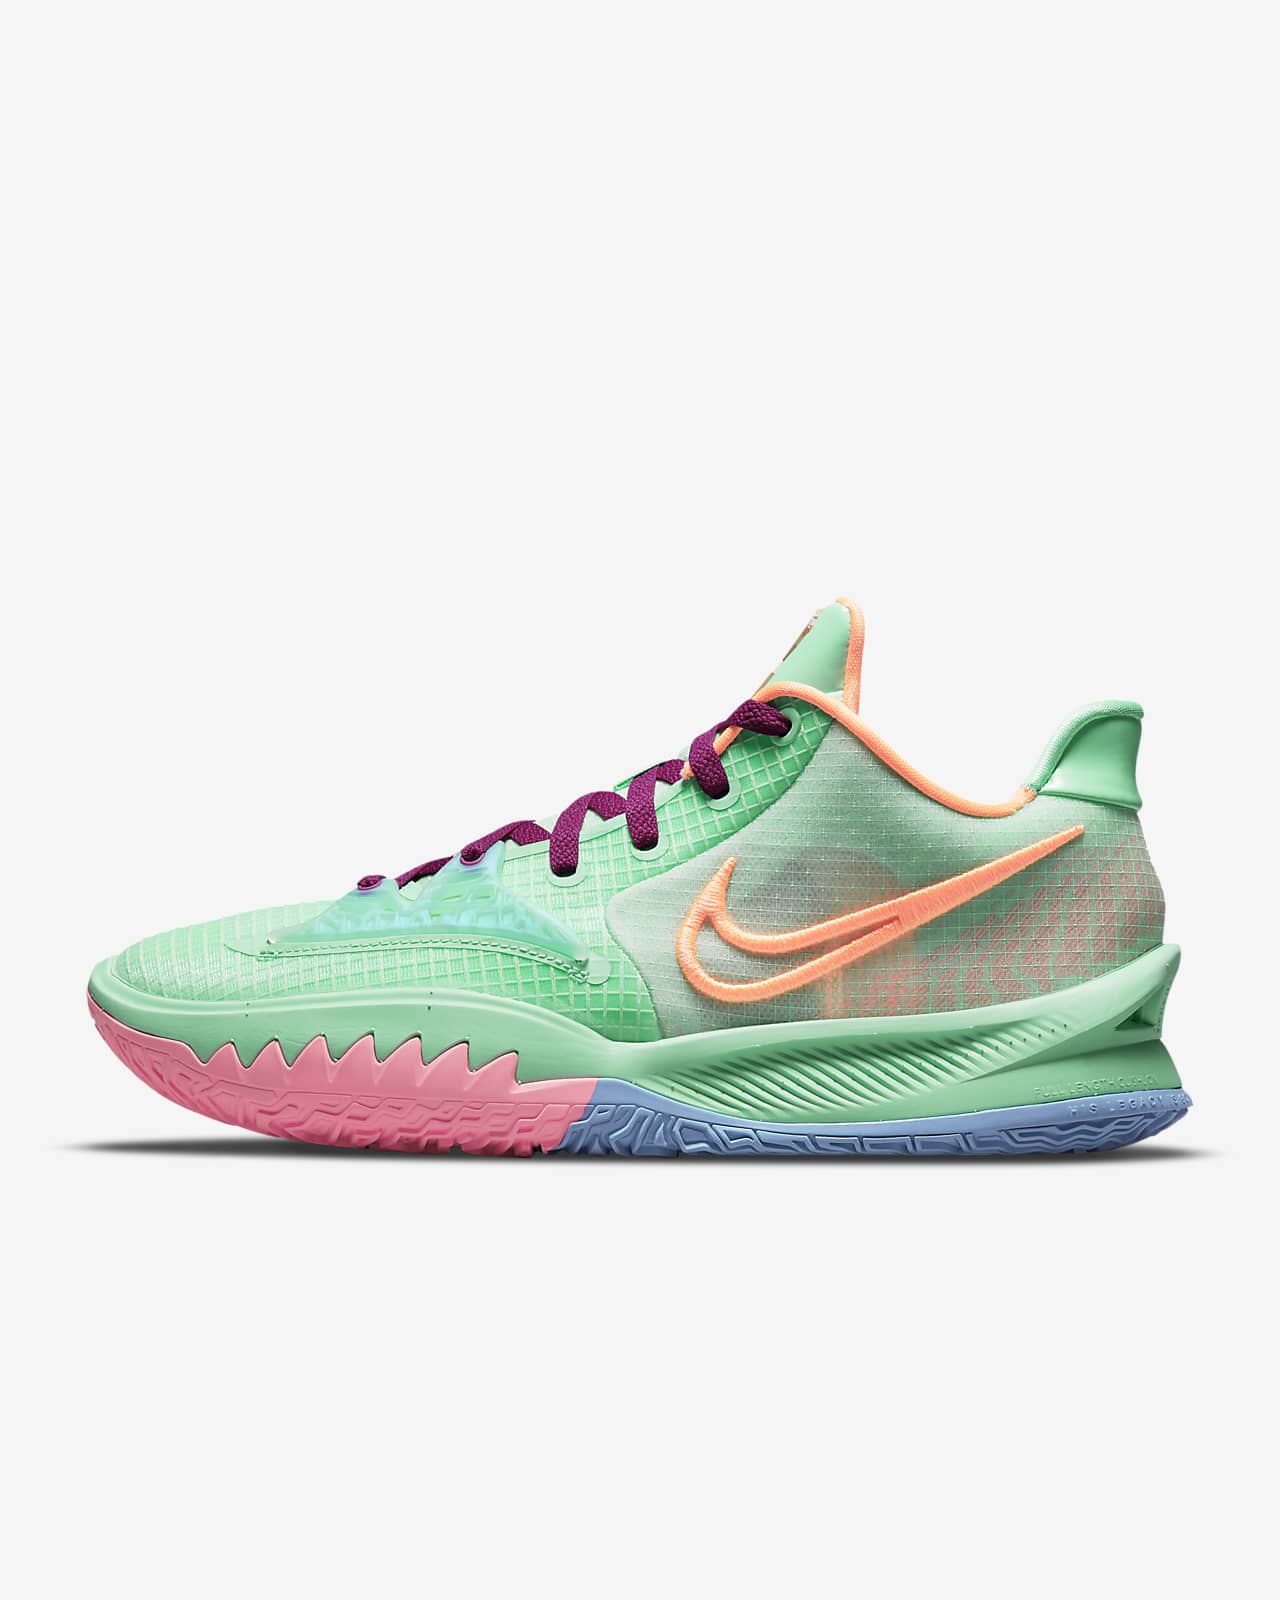 kyrie low ep pink